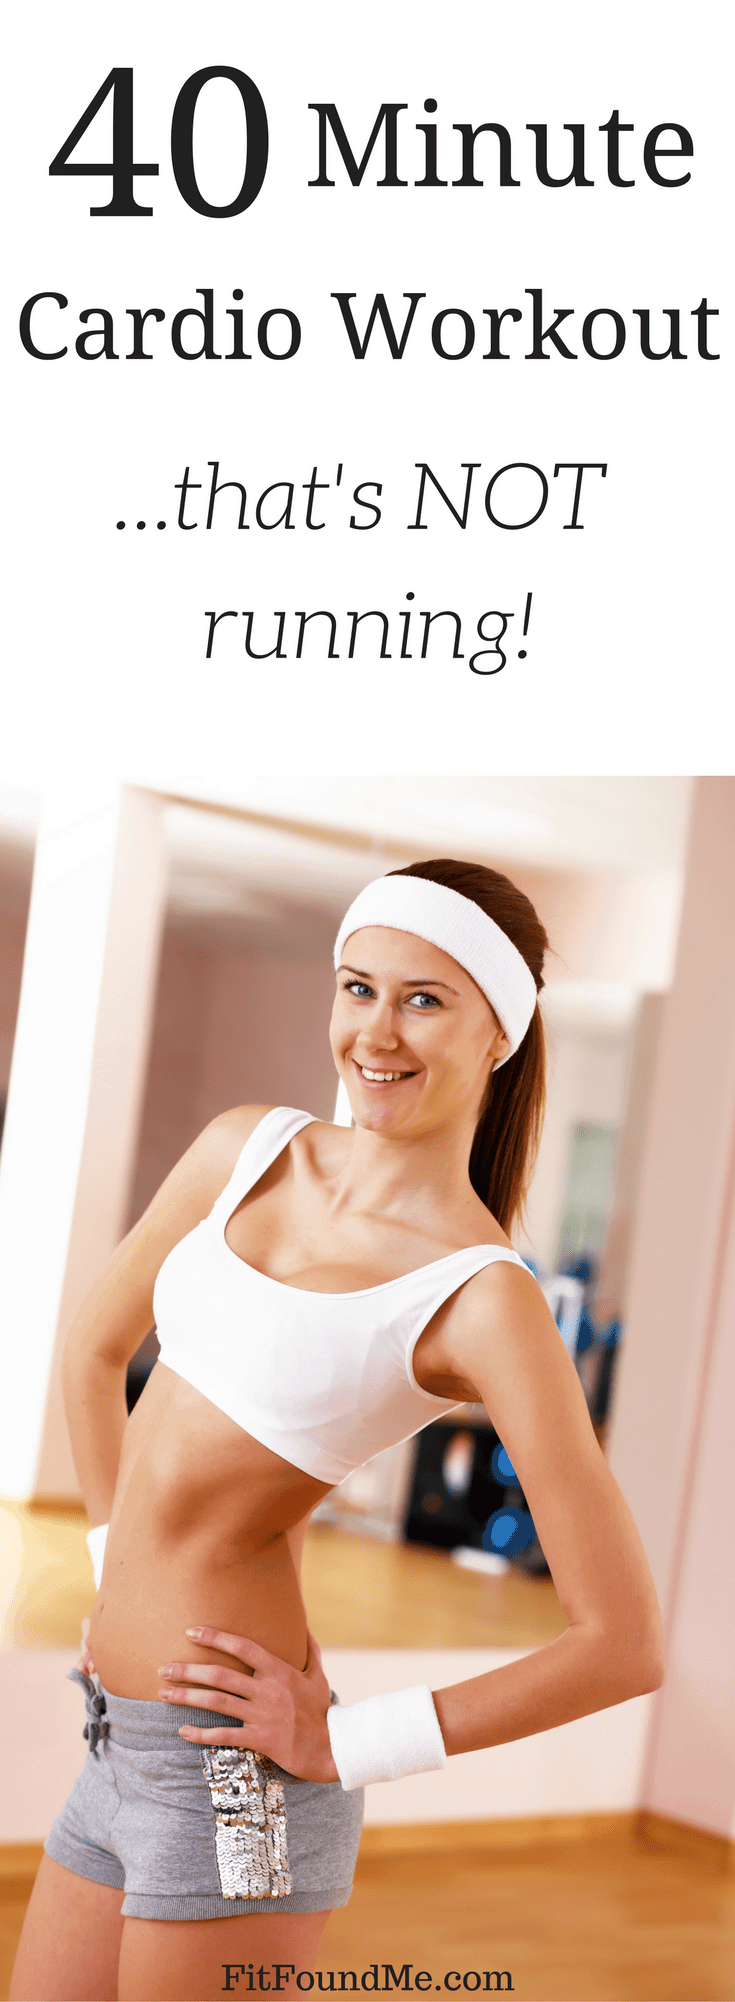 40 minute cardio workout for women